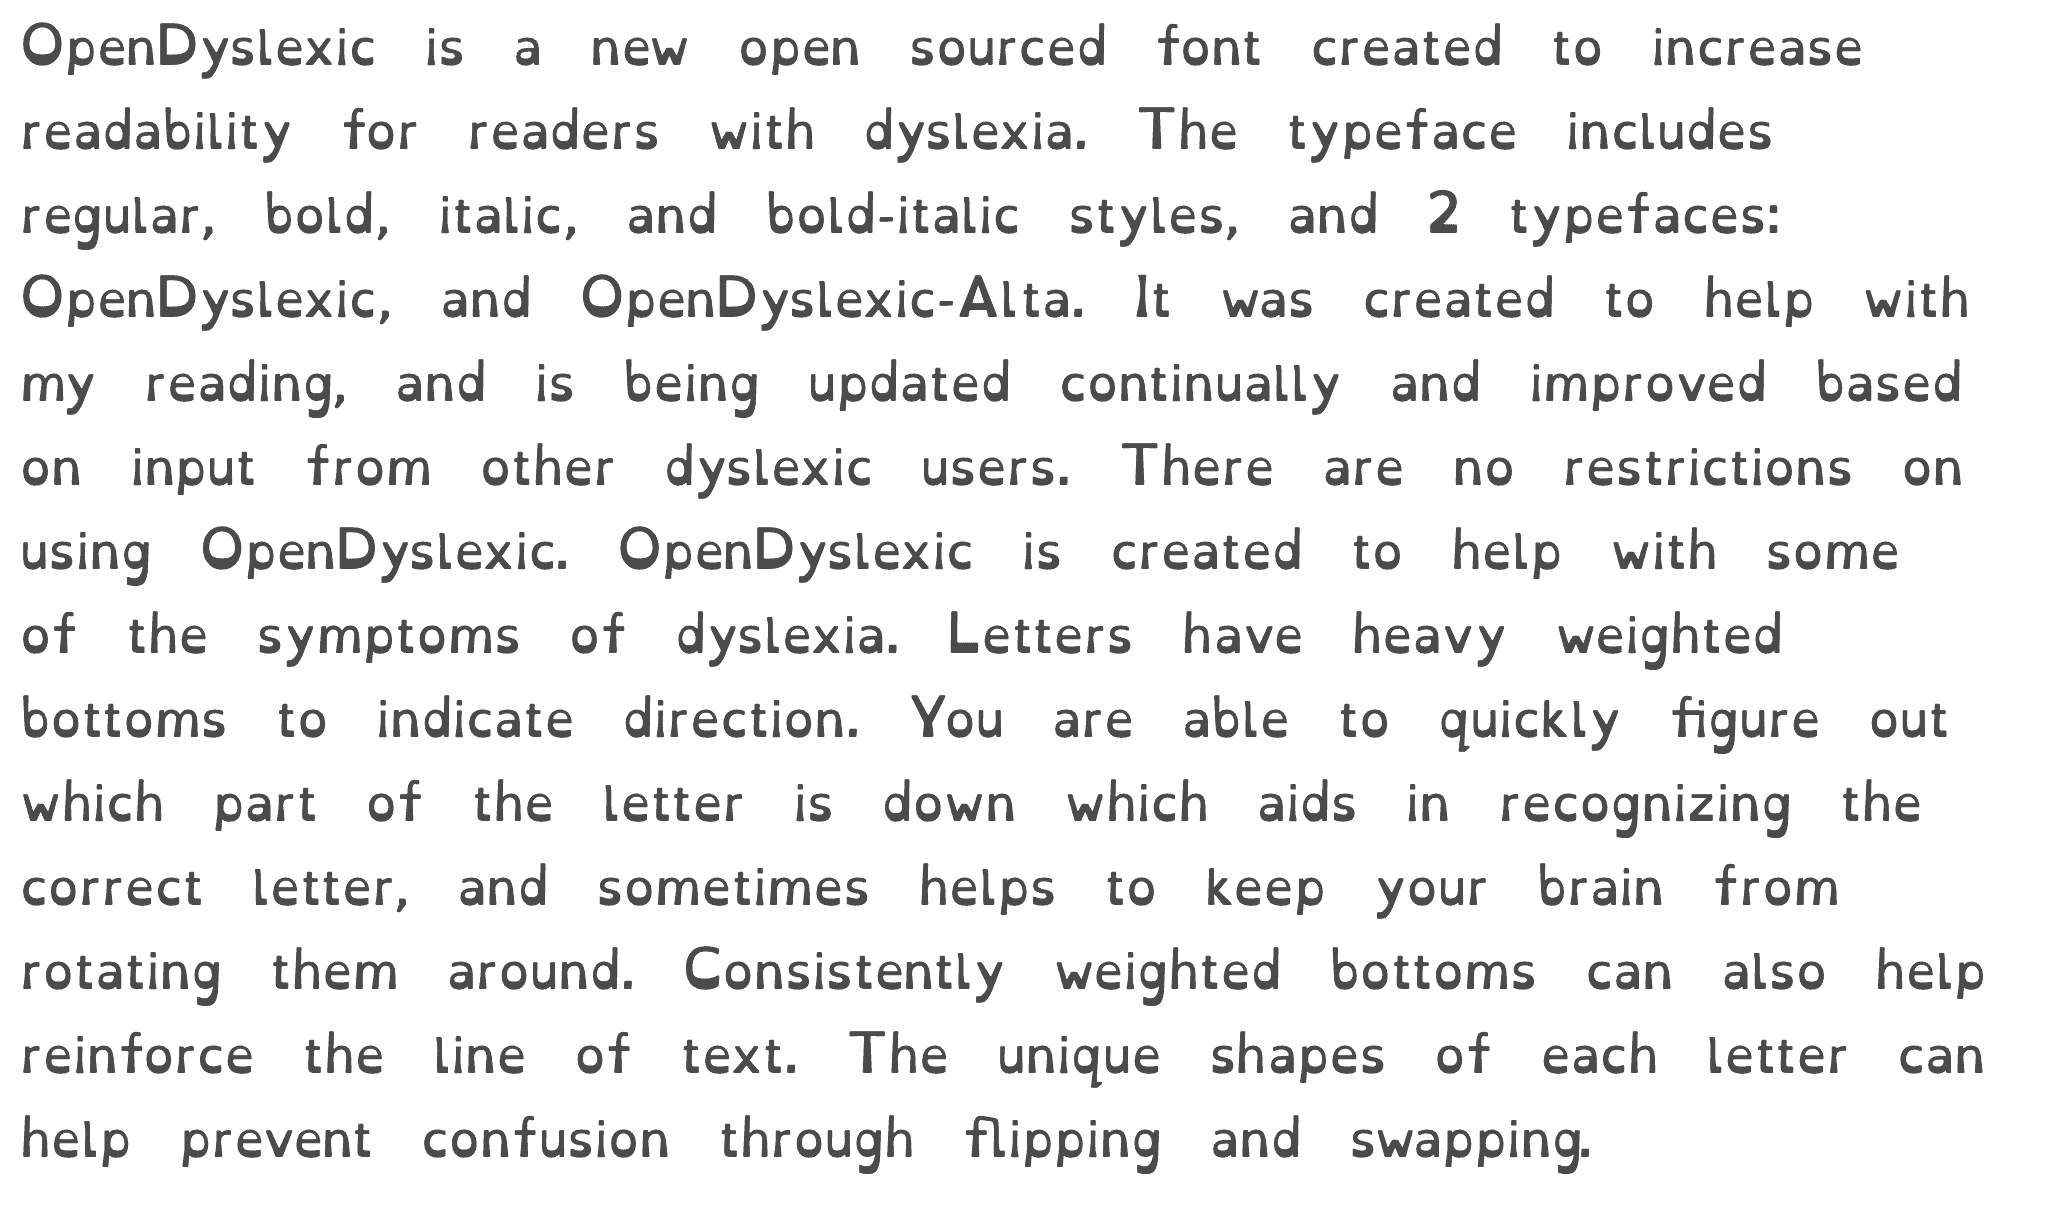 Paragraph of text taken from the About page on the Open Dyslexic website to show what the typeface looks like. Letters have heavy weighted bottoms, unique shapes, and wide spacing between words.